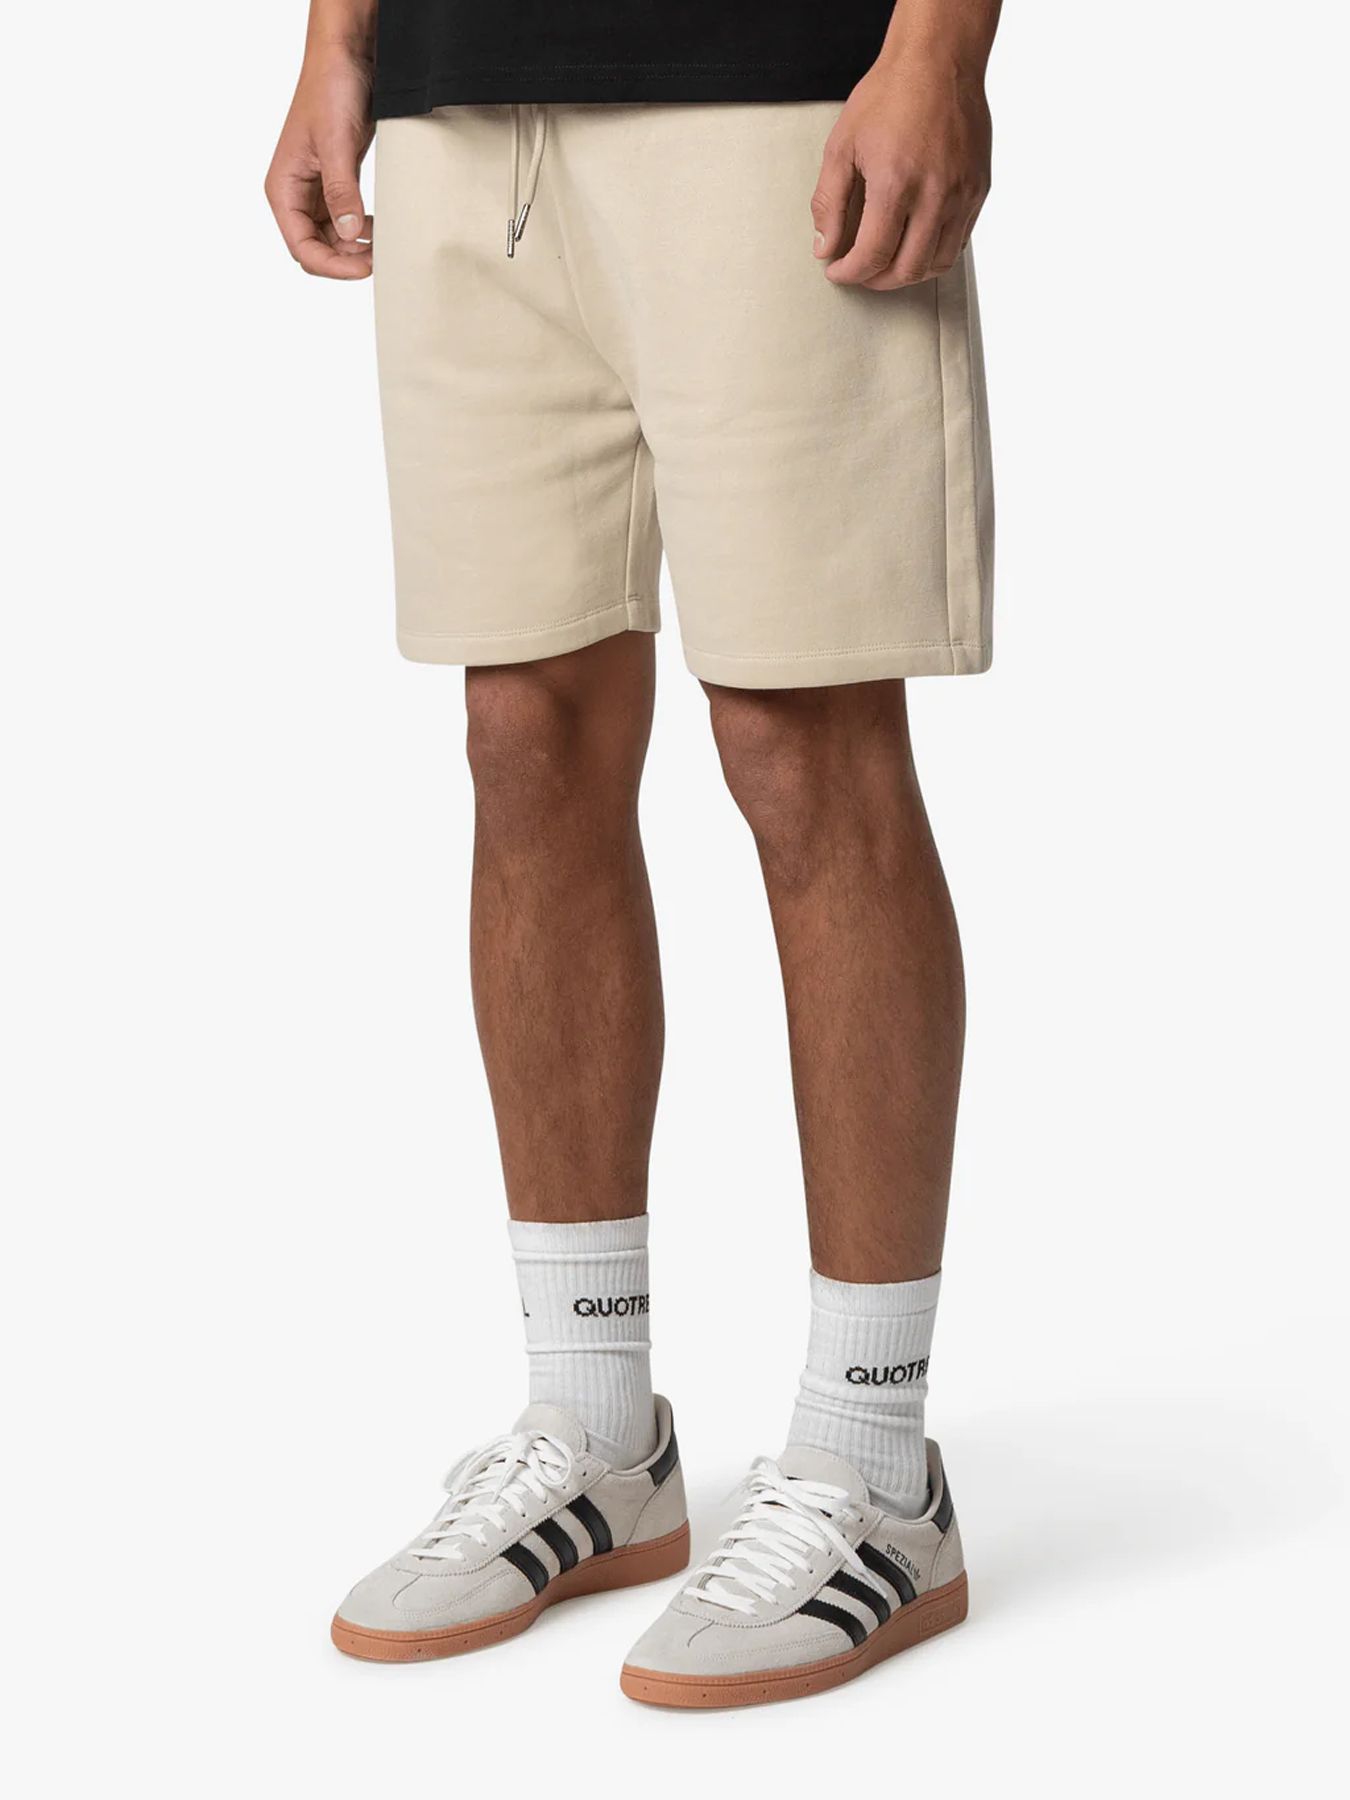 Quotrell Blank Shorts Beige 00109016-A3